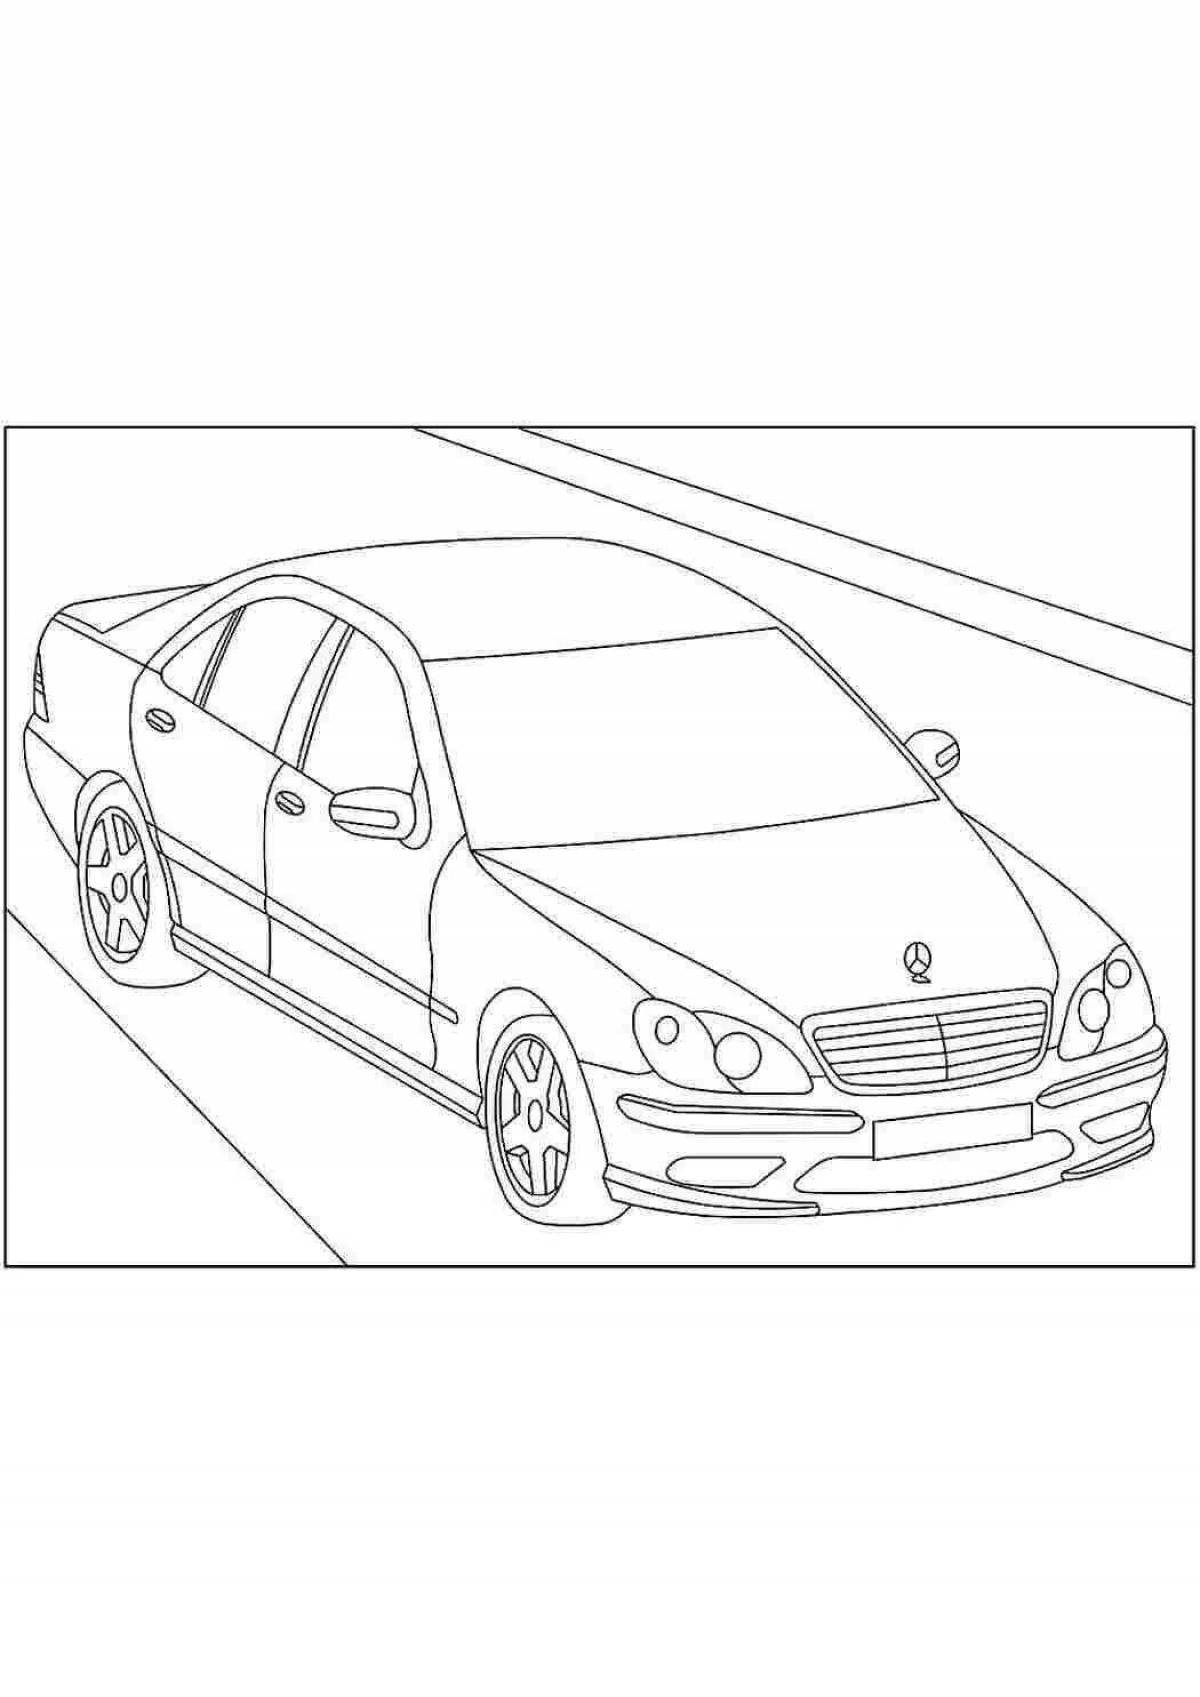 Amazing mercedes coloring pages for kids